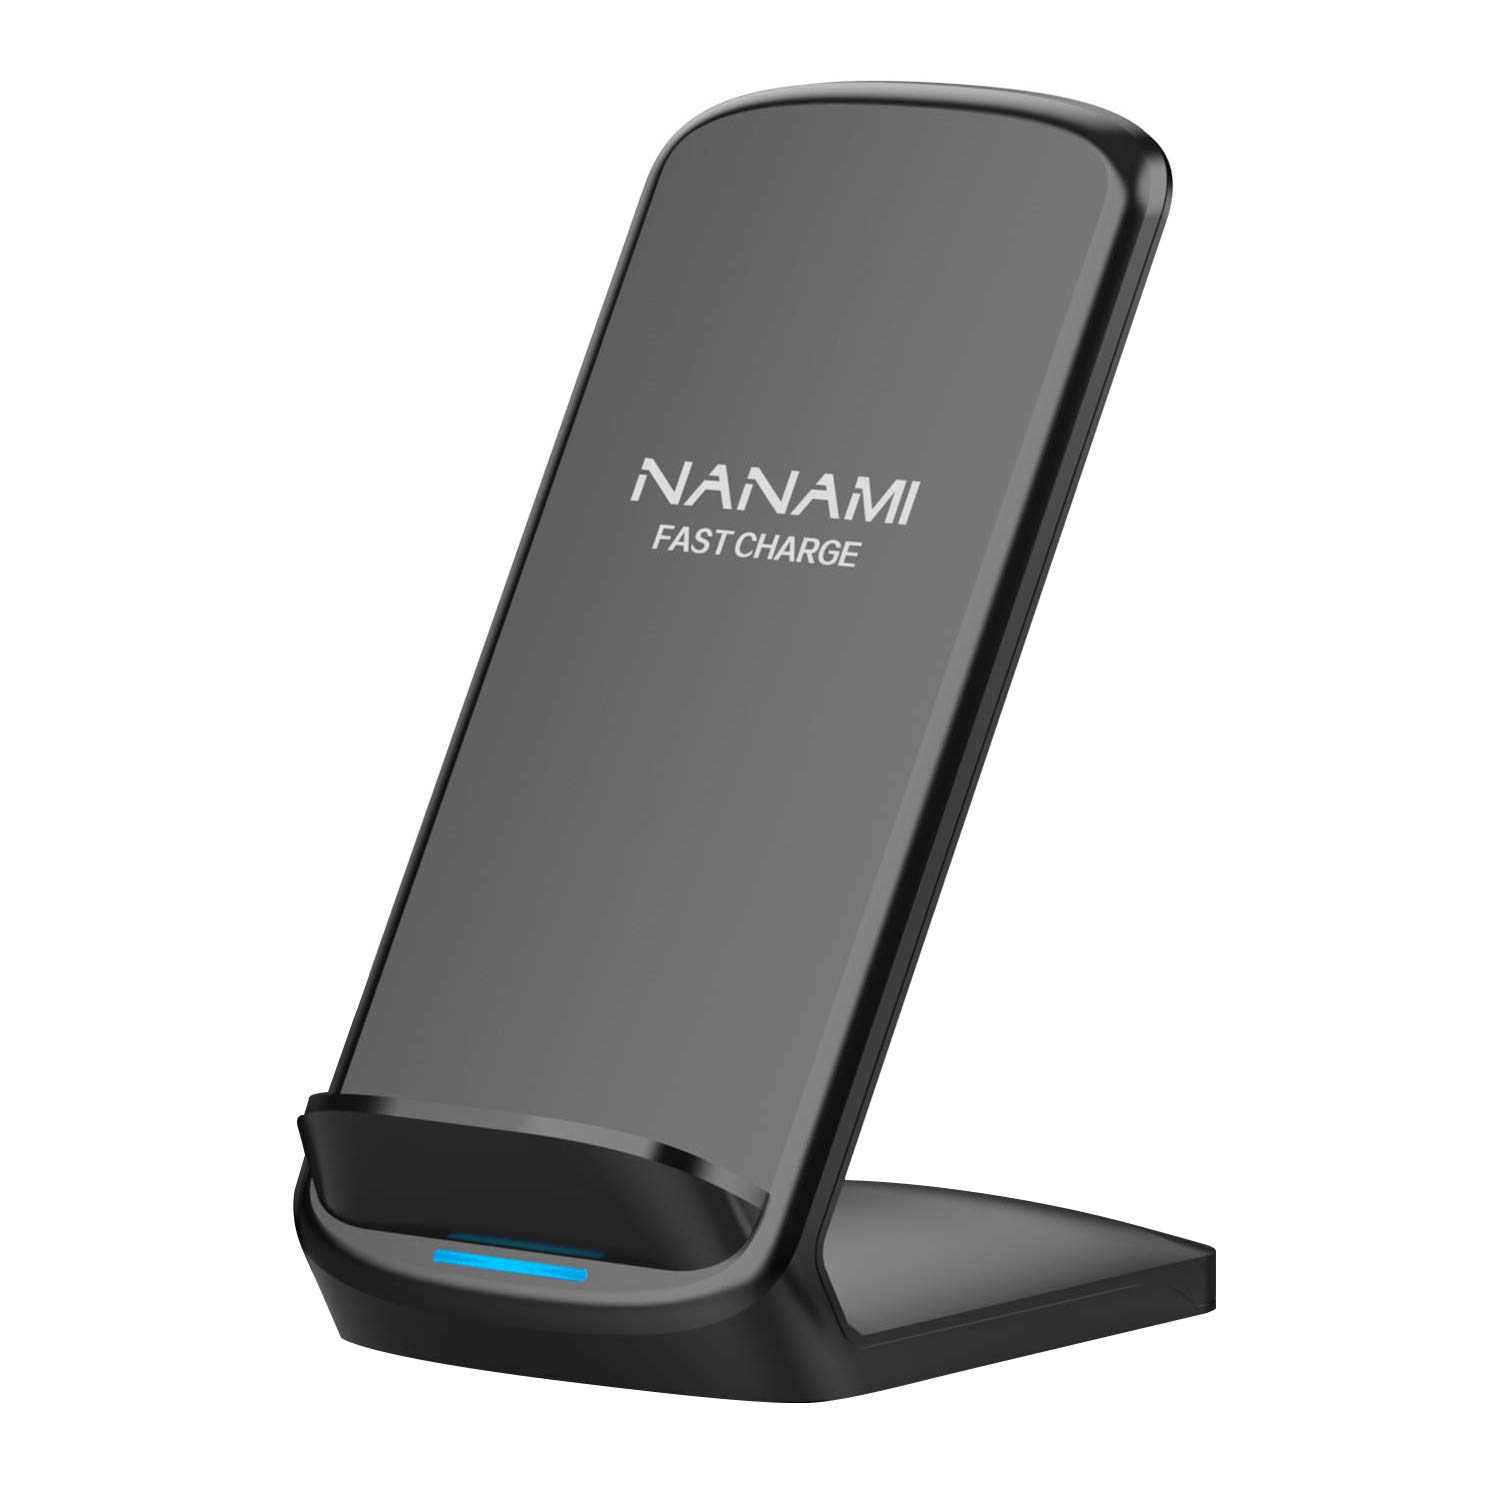 nanami upgraded fast wireless charger fast wireless charging stand compatible samsung galaxy s10+/s9/s8/s7 edge/note 10/9/8 &amp; qi charger compatible iphone 11/11 pro/11 pro max/xr/xs max/xs/x/8/8 plus - nanami fast wireless charging life